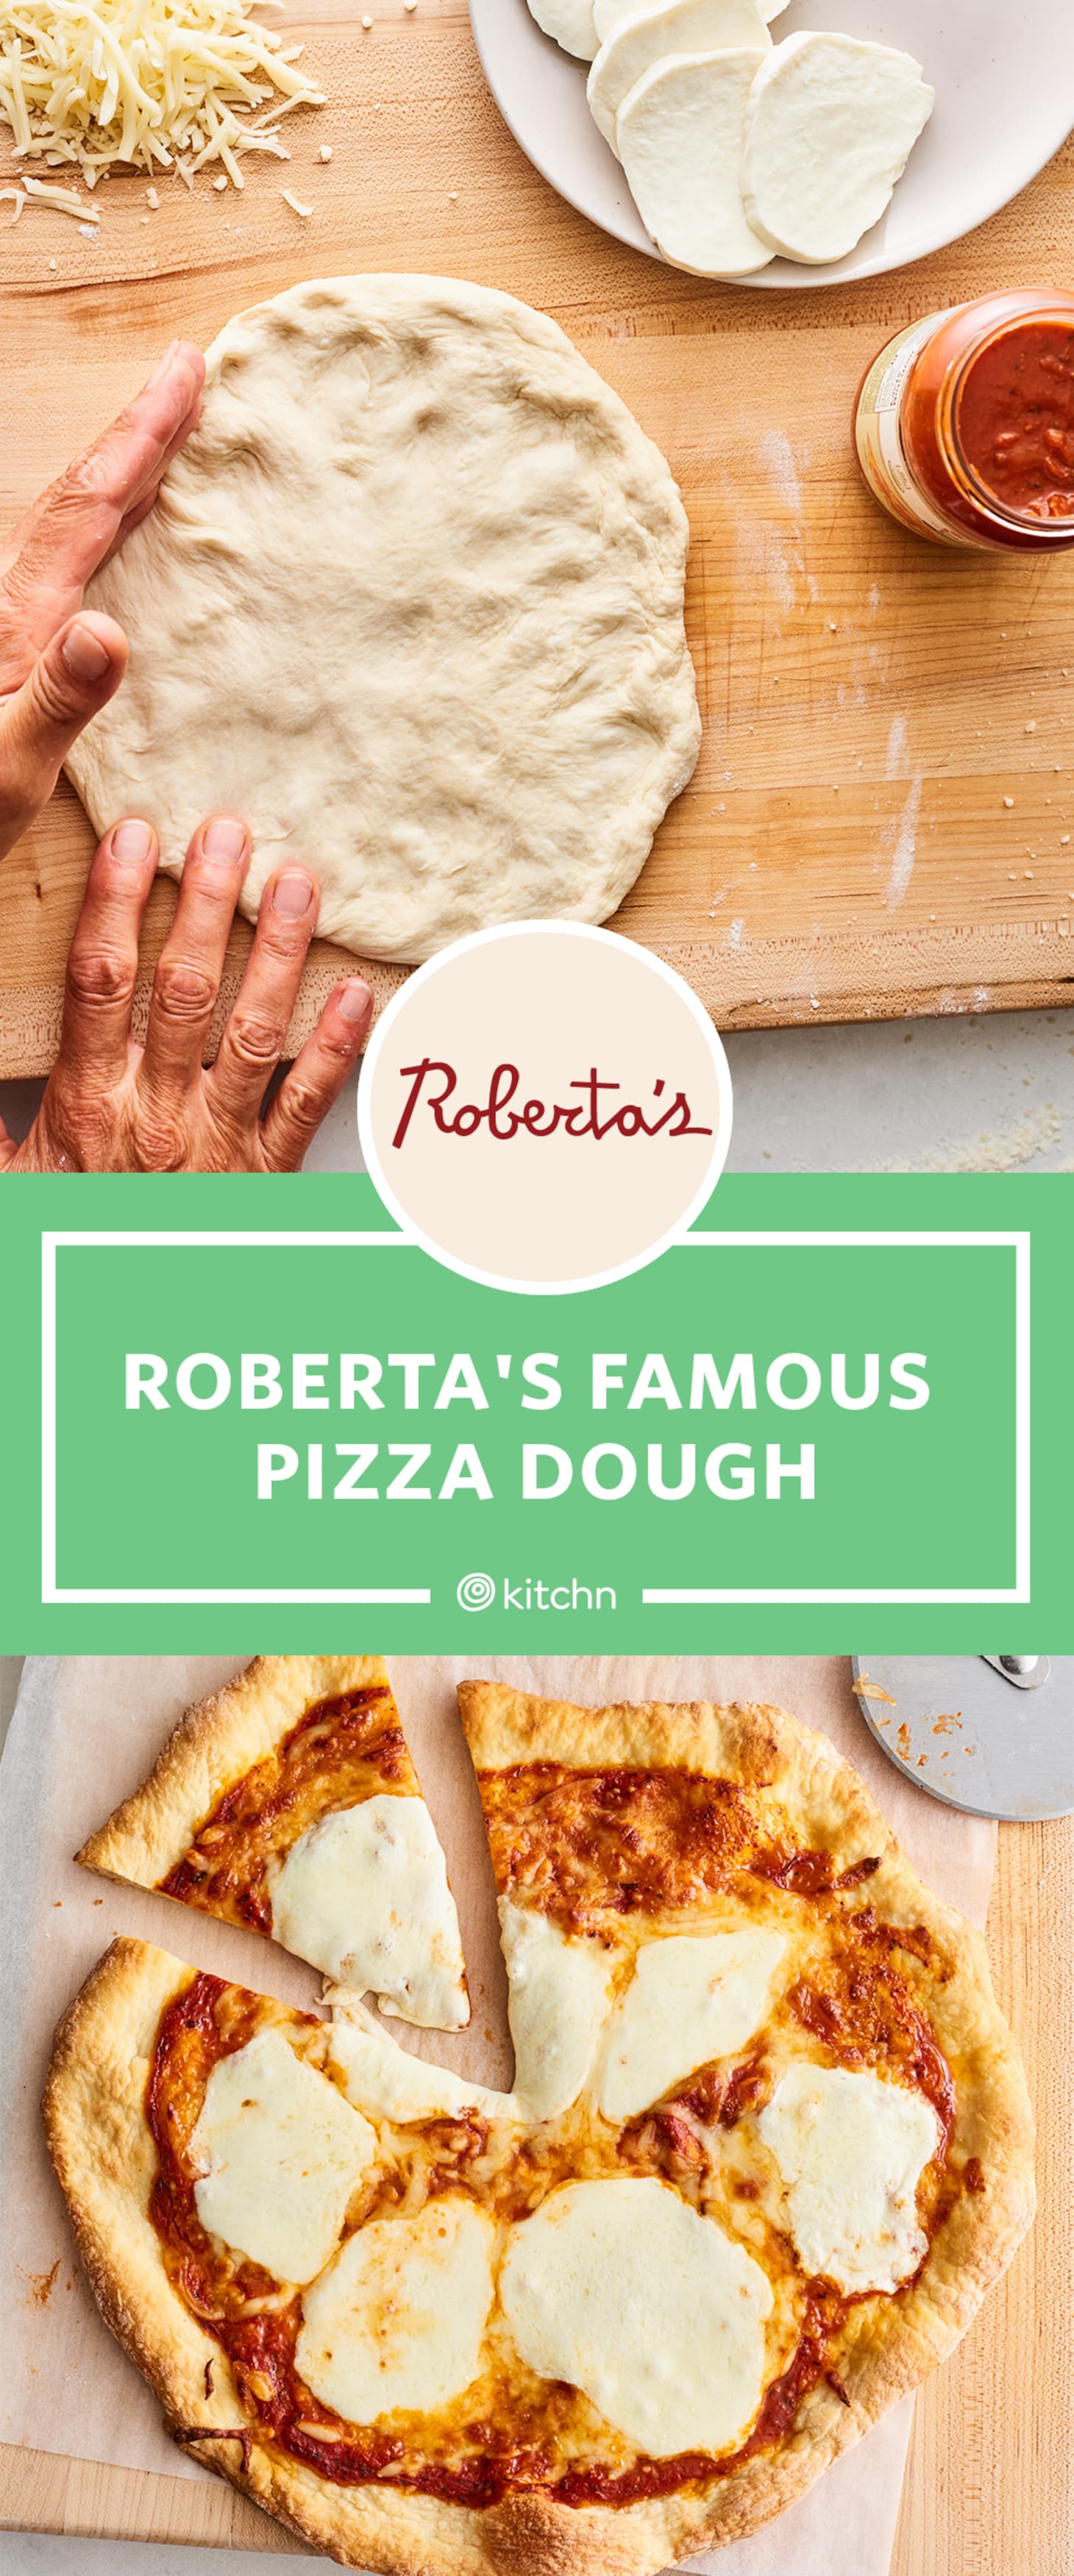 Our Review of Roberta's Pizza Dough Recipe Kitchn